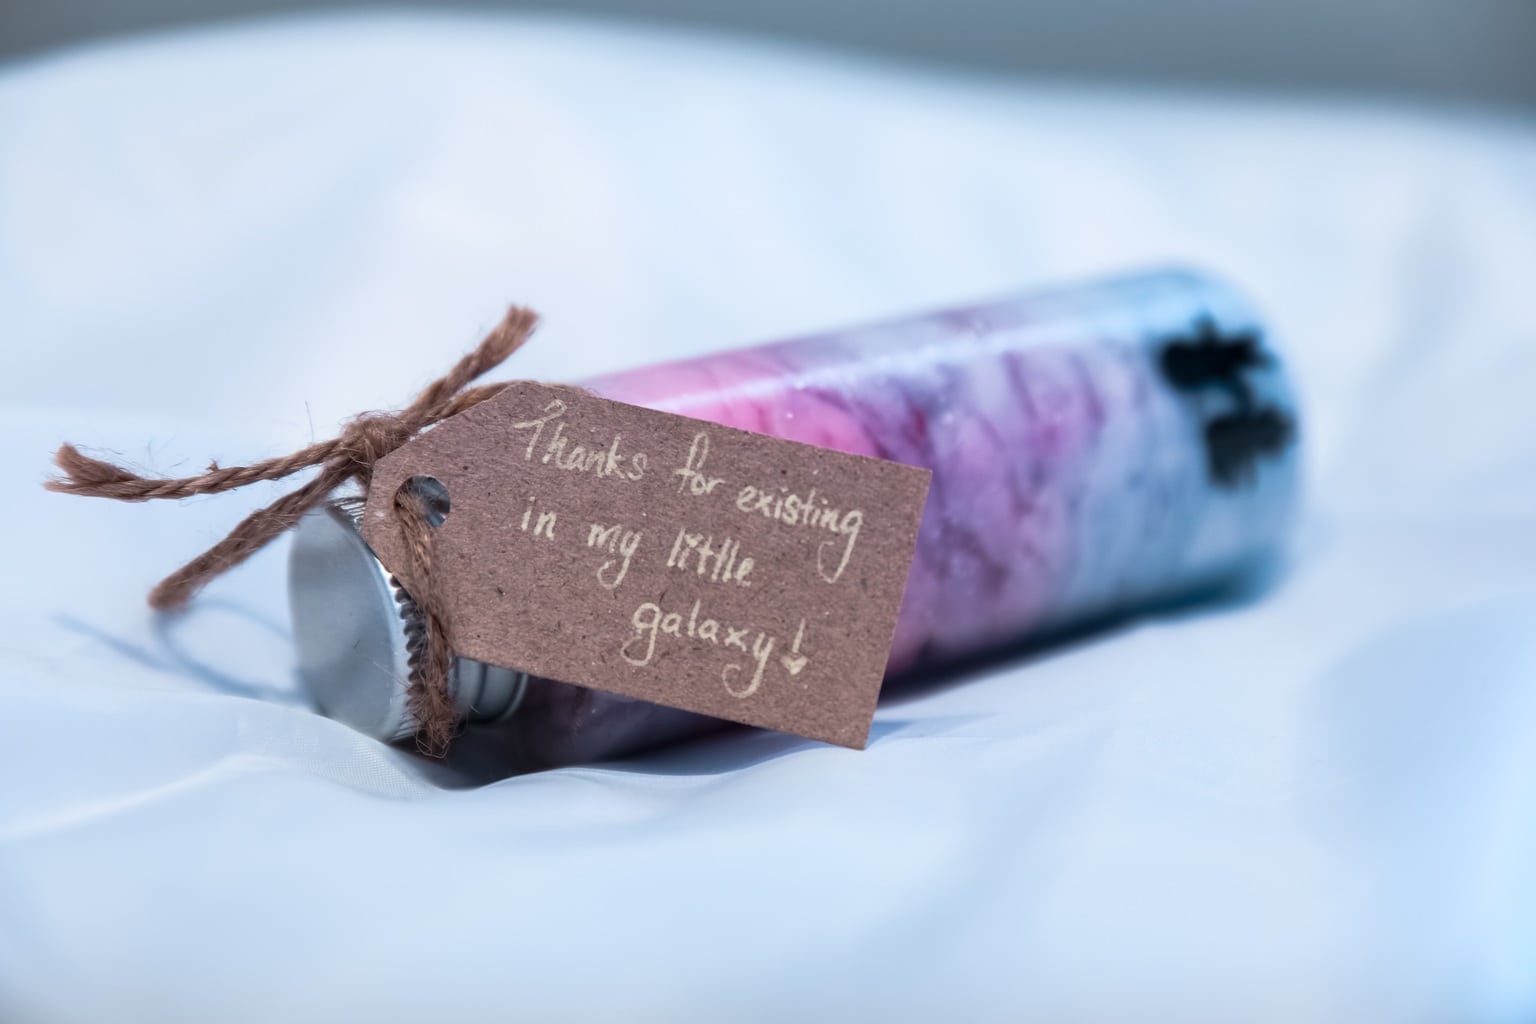 A creative cute way to show your gratitude to someone with a little note tied to a little bottle.